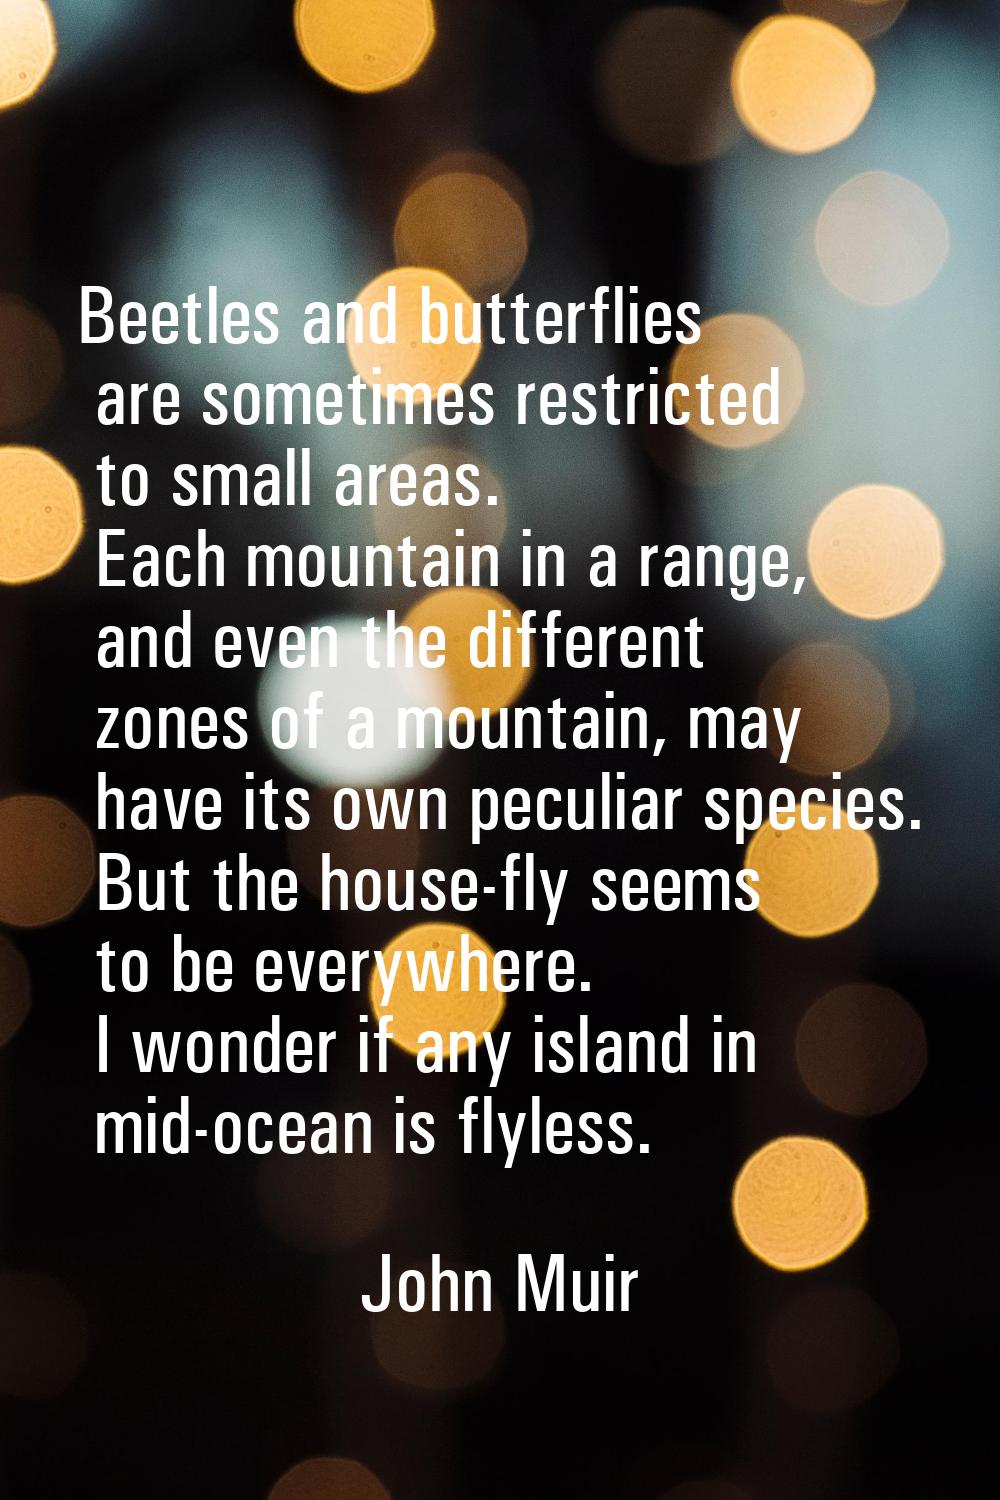 Beetles and butterflies are sometimes restricted to small areas. Each mountain in a range, and even